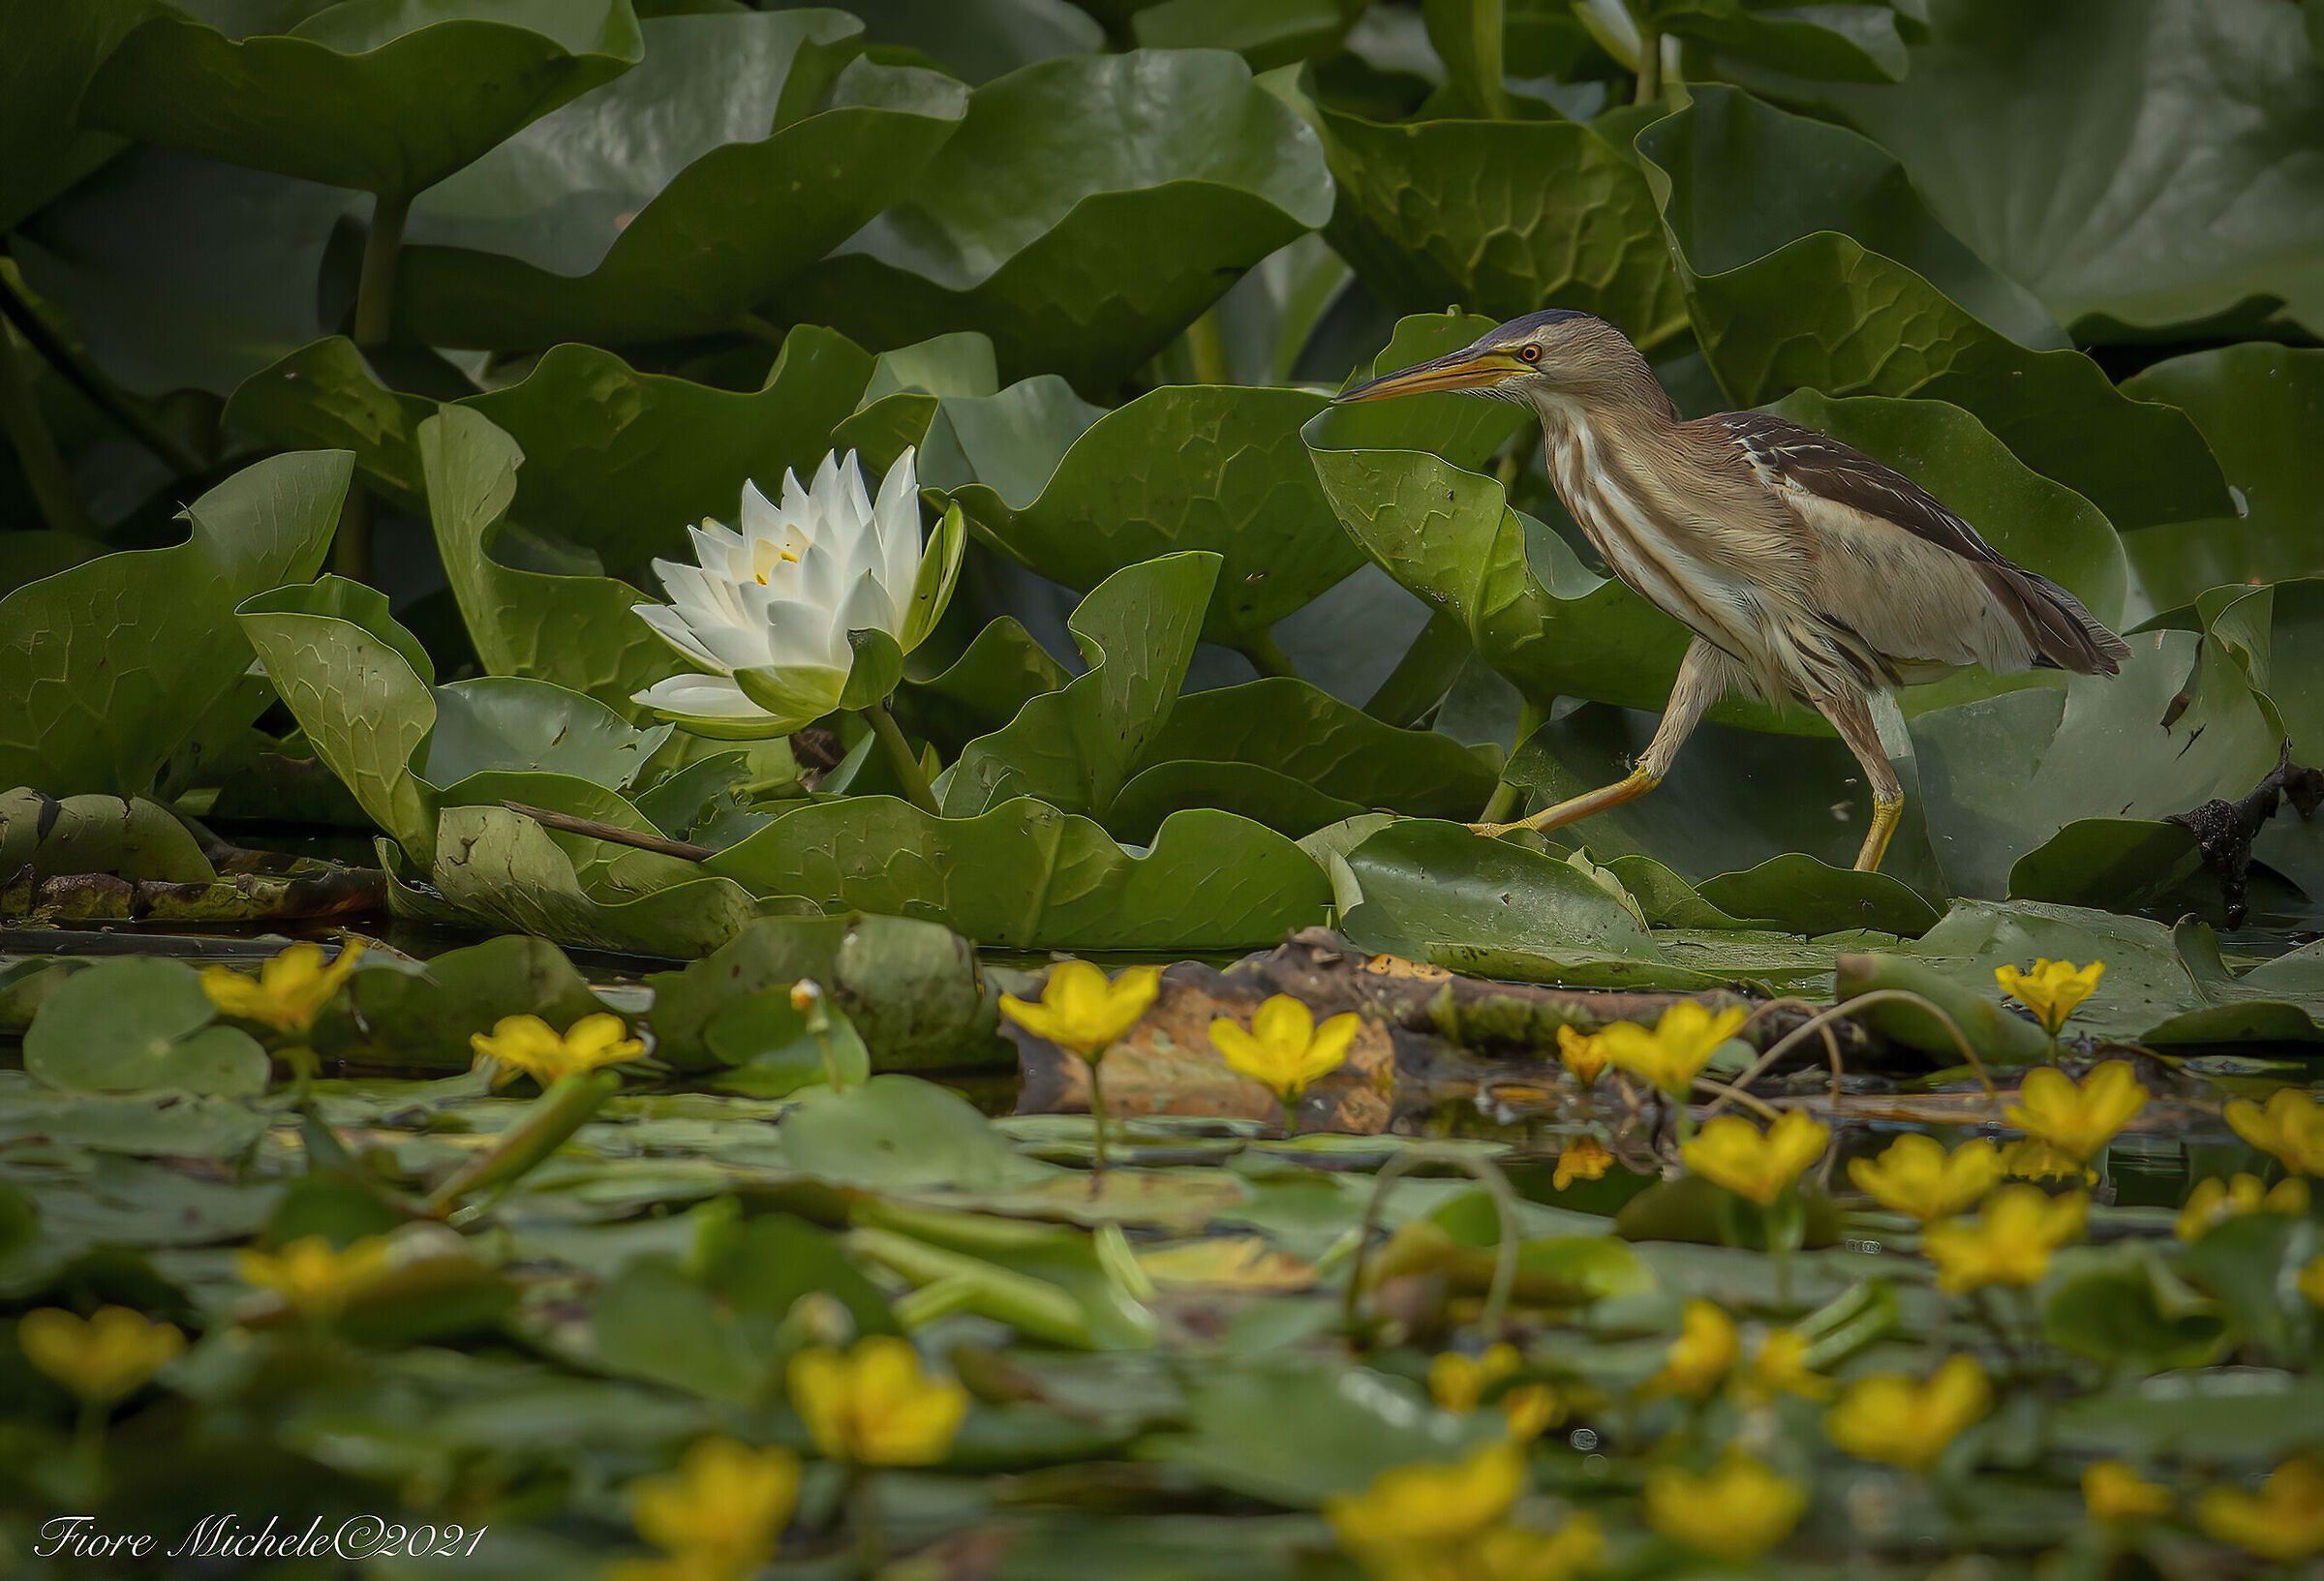 The bittern and the water lily...